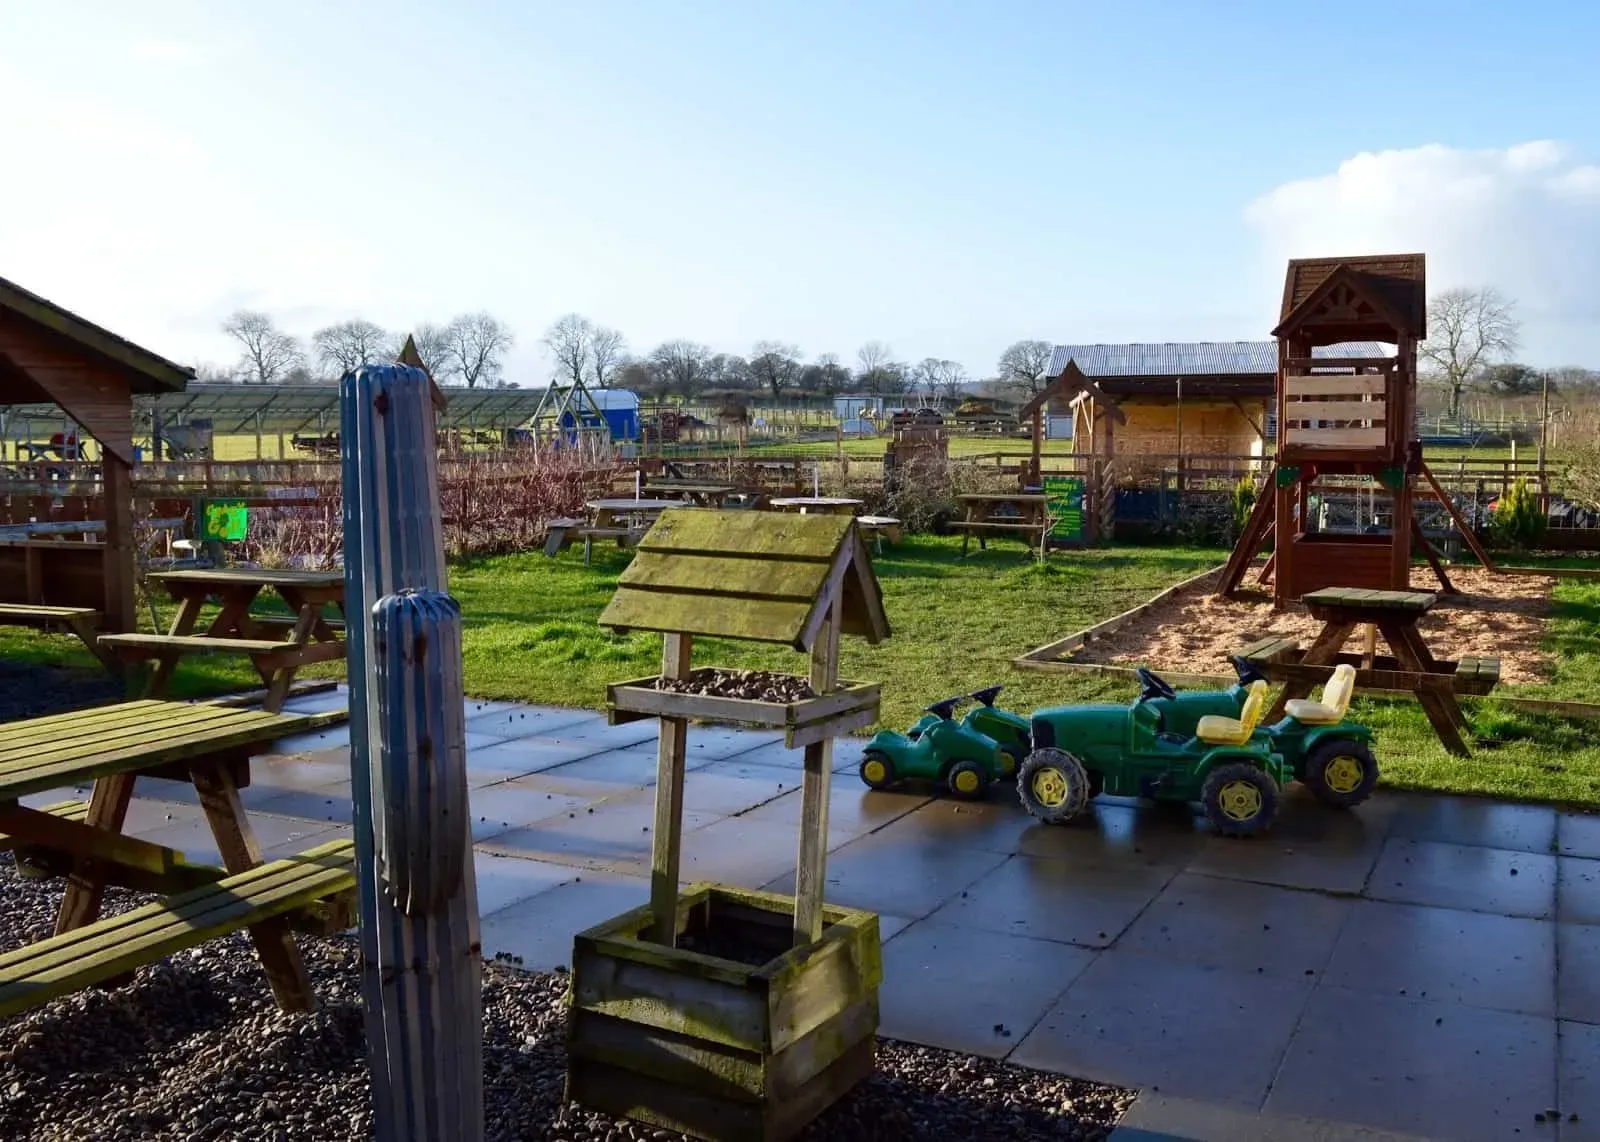 The Adventure Play Area at Northumberland Country Zoo.